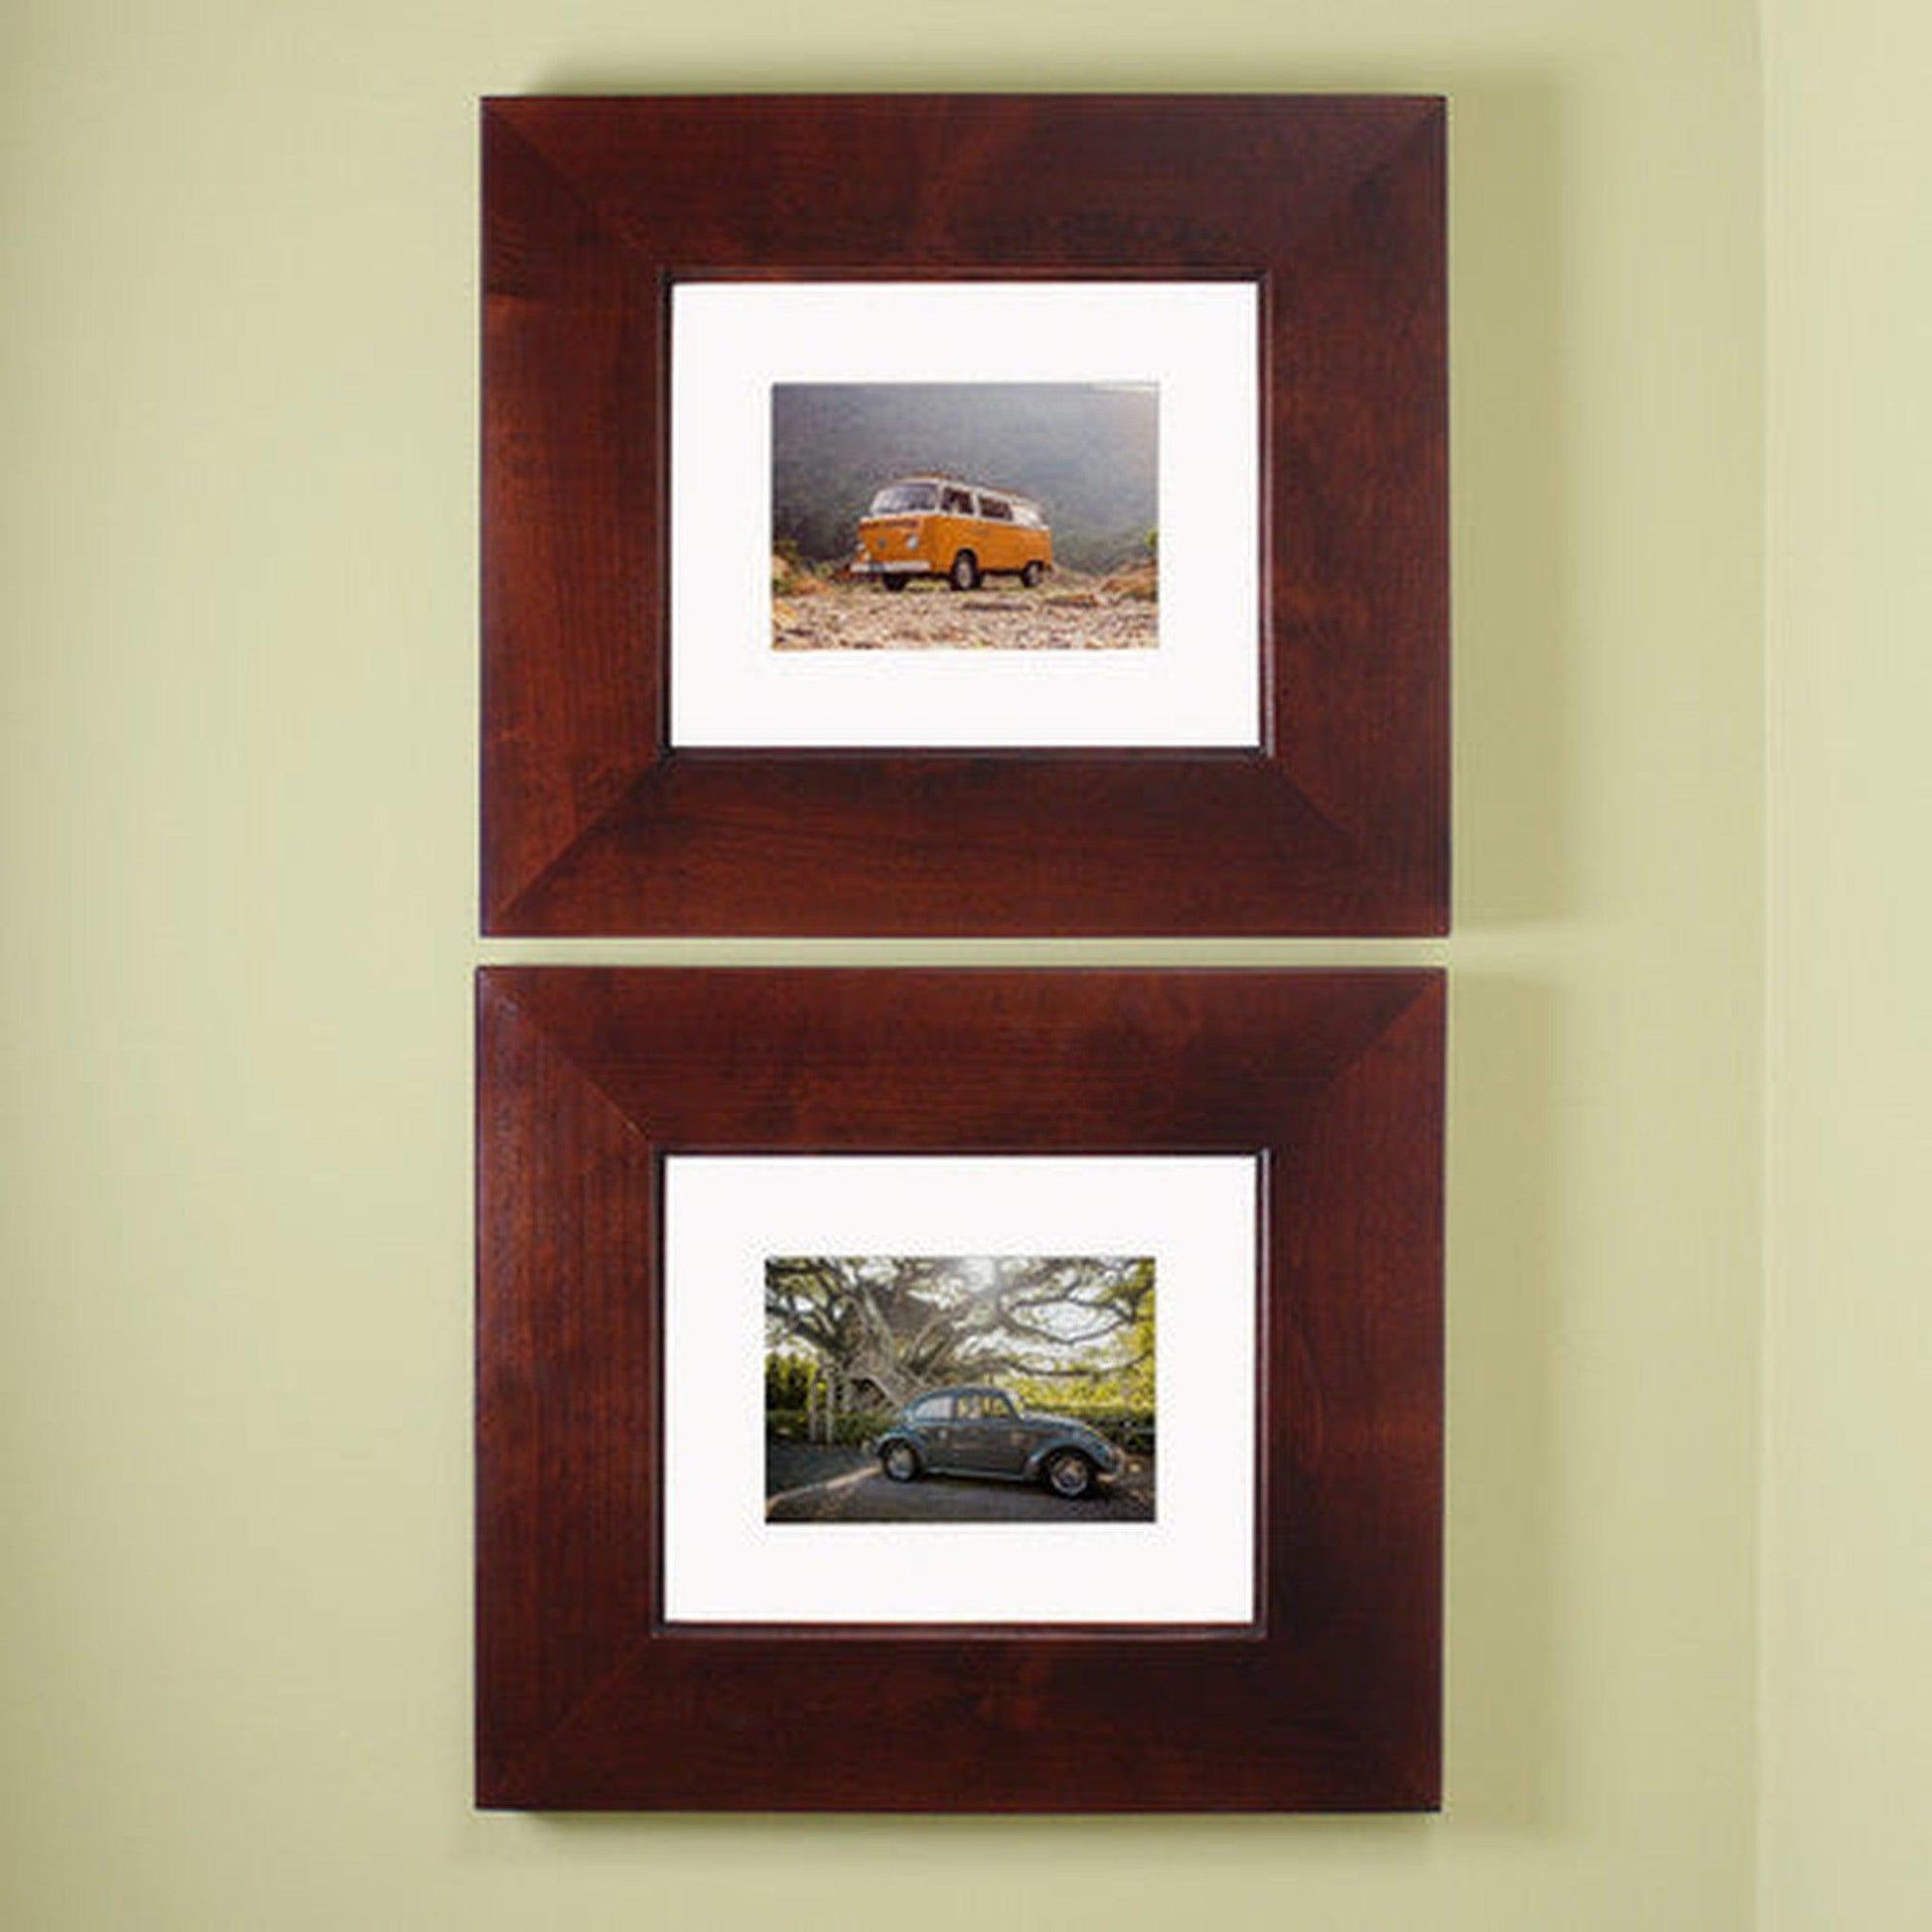 Fox Hollow Furnishings 14" x 11" Espresso Compact Landscape Recessed Picture Frame Medicine Cabinet